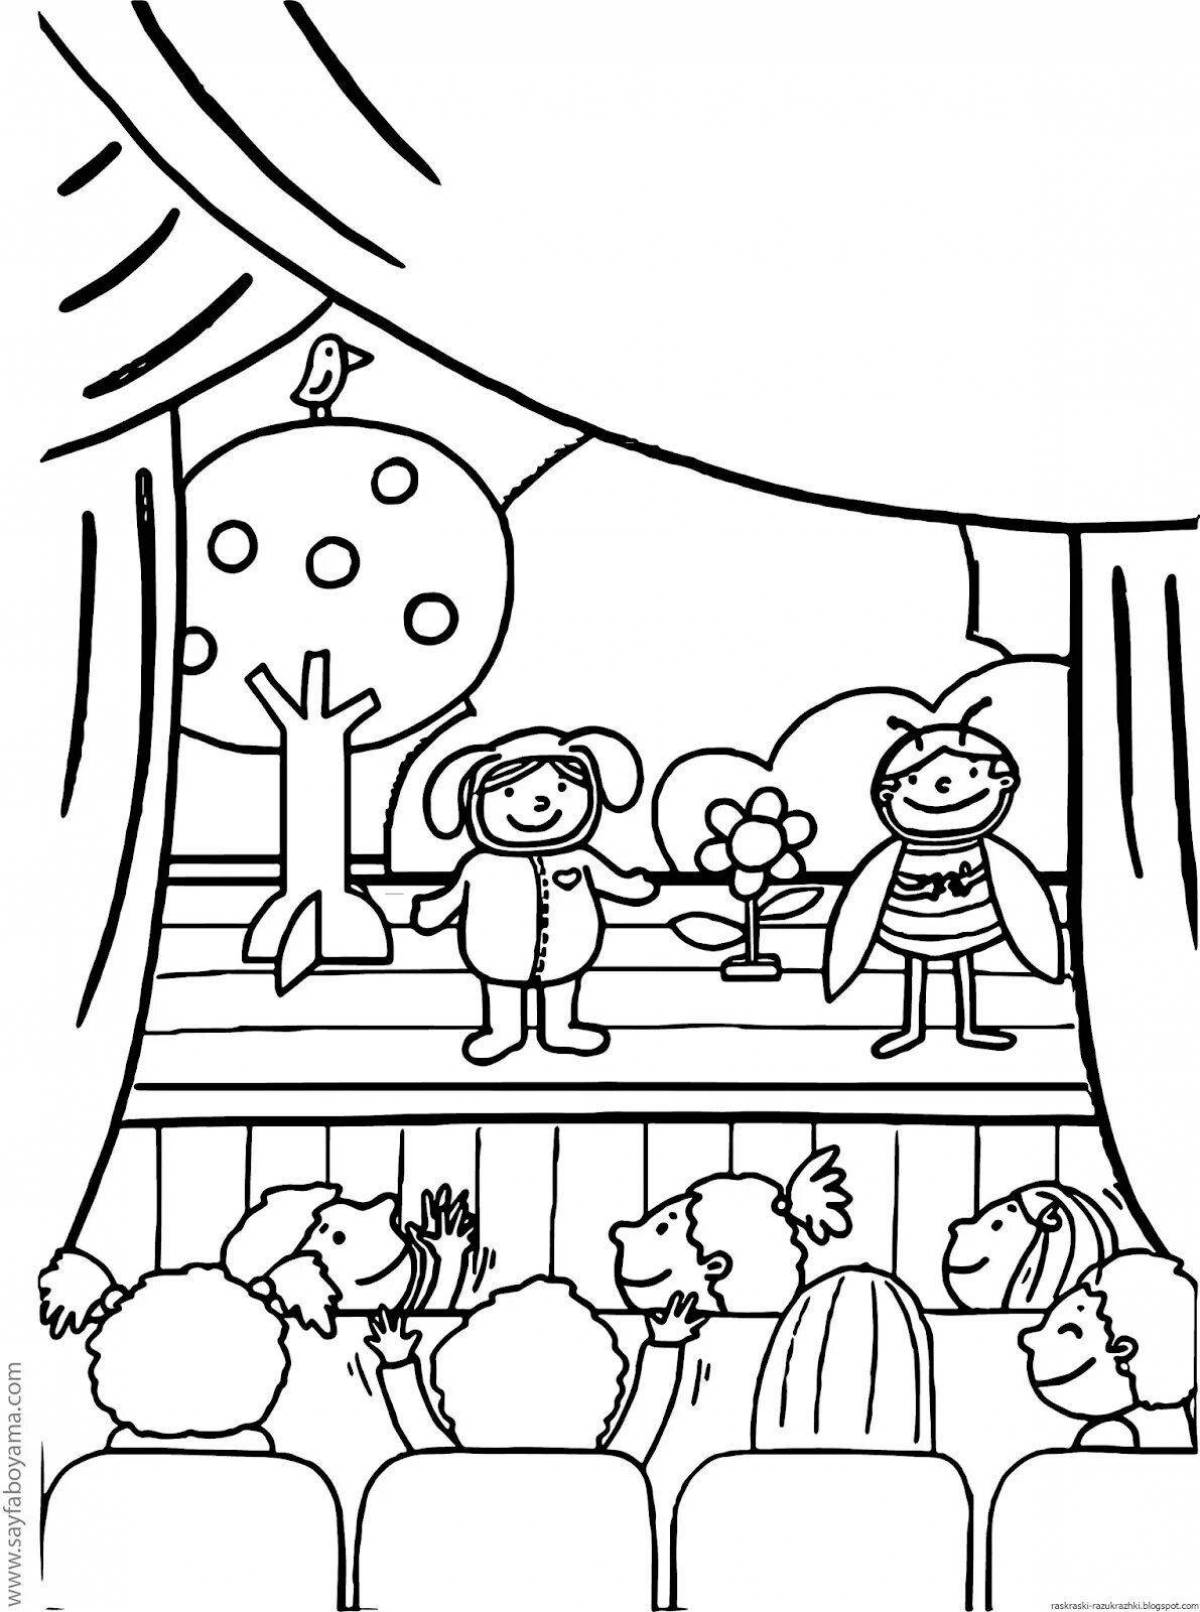 Coloring page holiday puppet theater